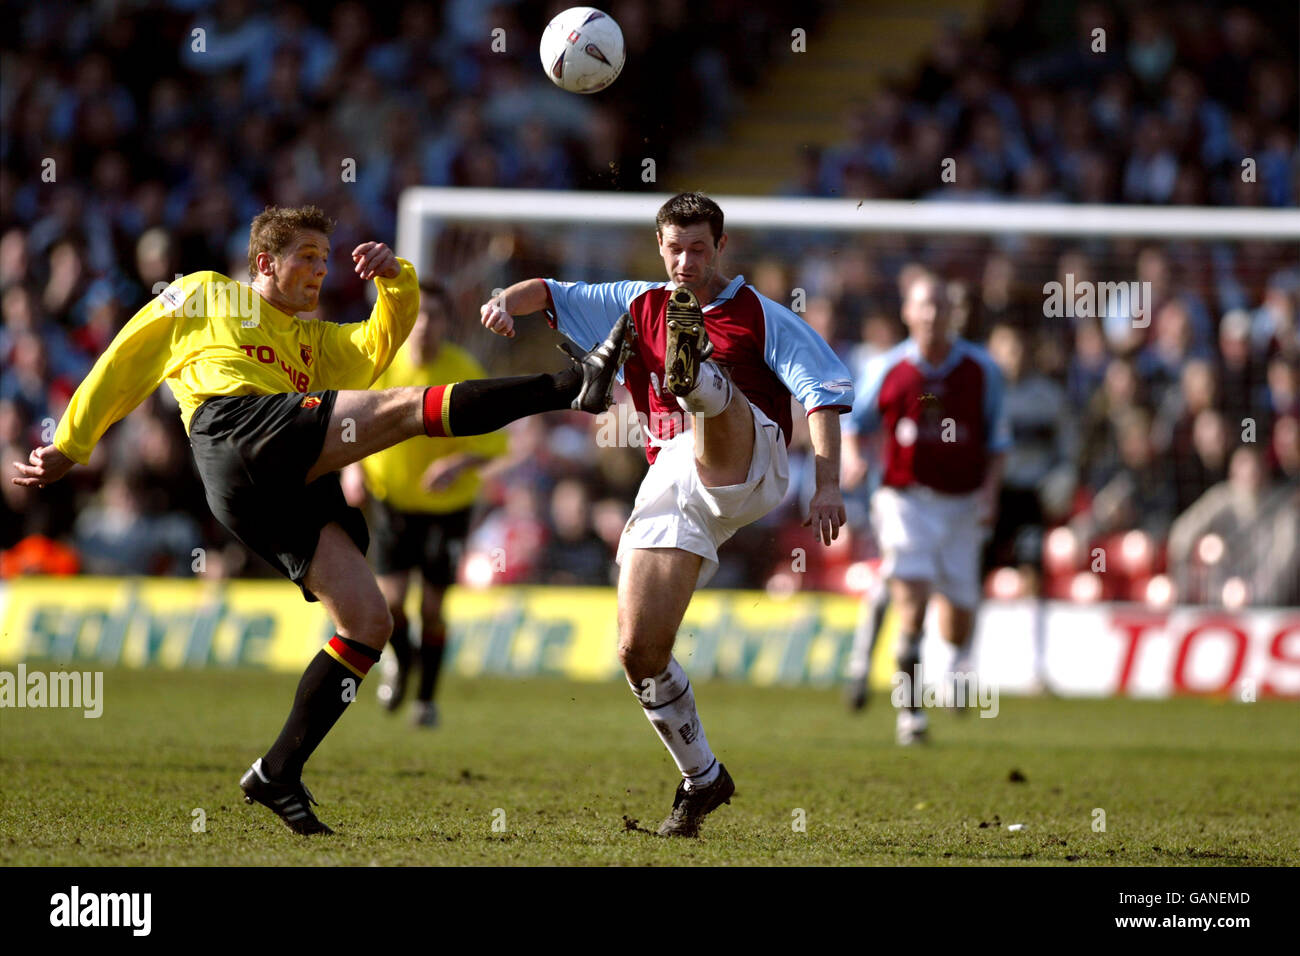 Soccer - AXA FA Cup - Quarter Final - Watford v Burnley. Watford's Neal Ardley and Burnley's Alan Moore battle for the ball Stock Photo